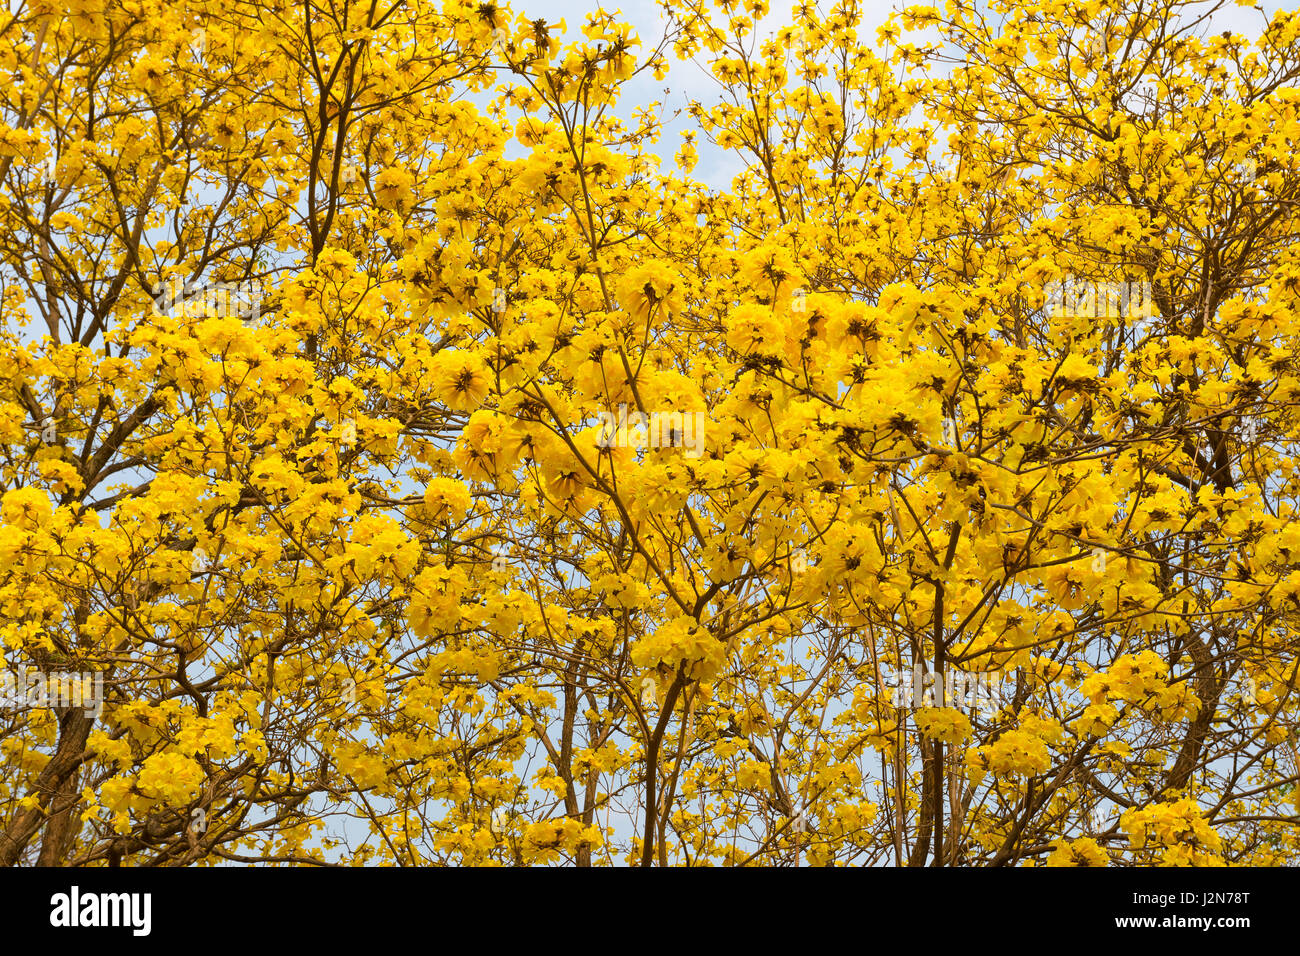 Flowers of Golden Trumpet trees, or tabeguia, in full bloom against partly cloudy sky Stock Photo